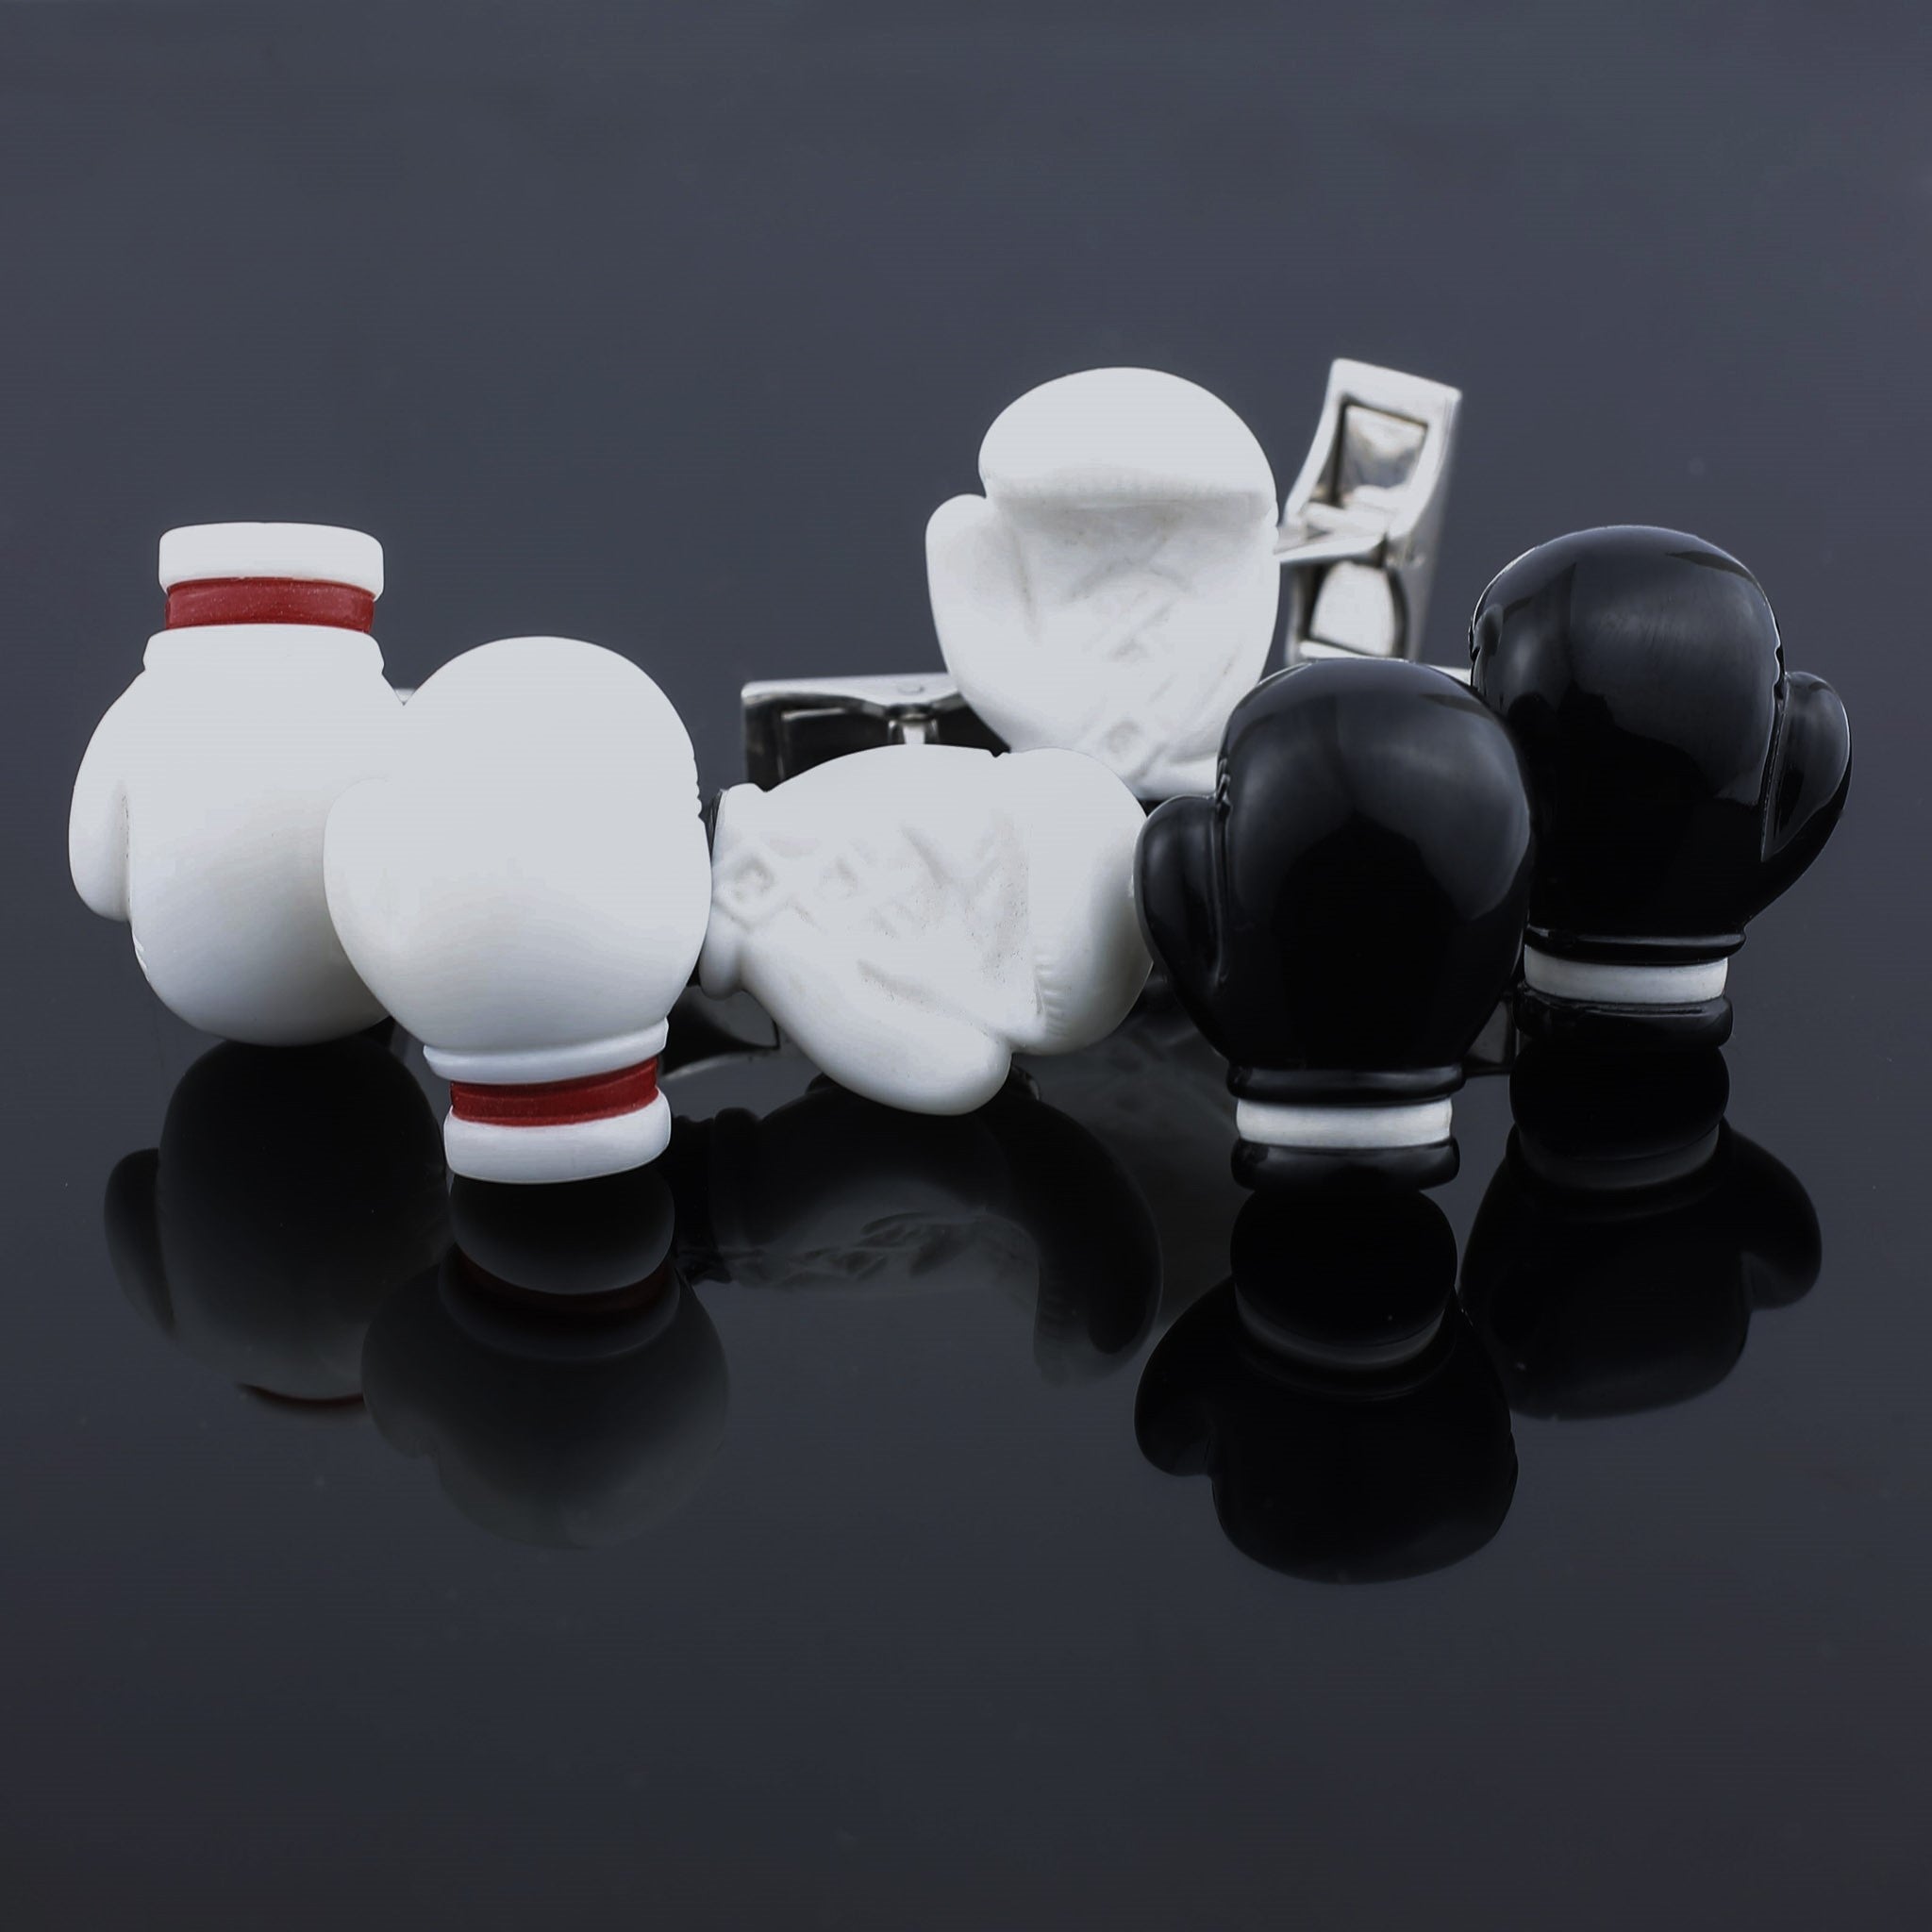 boxing glove cufflinks cacholong & onyx/coral